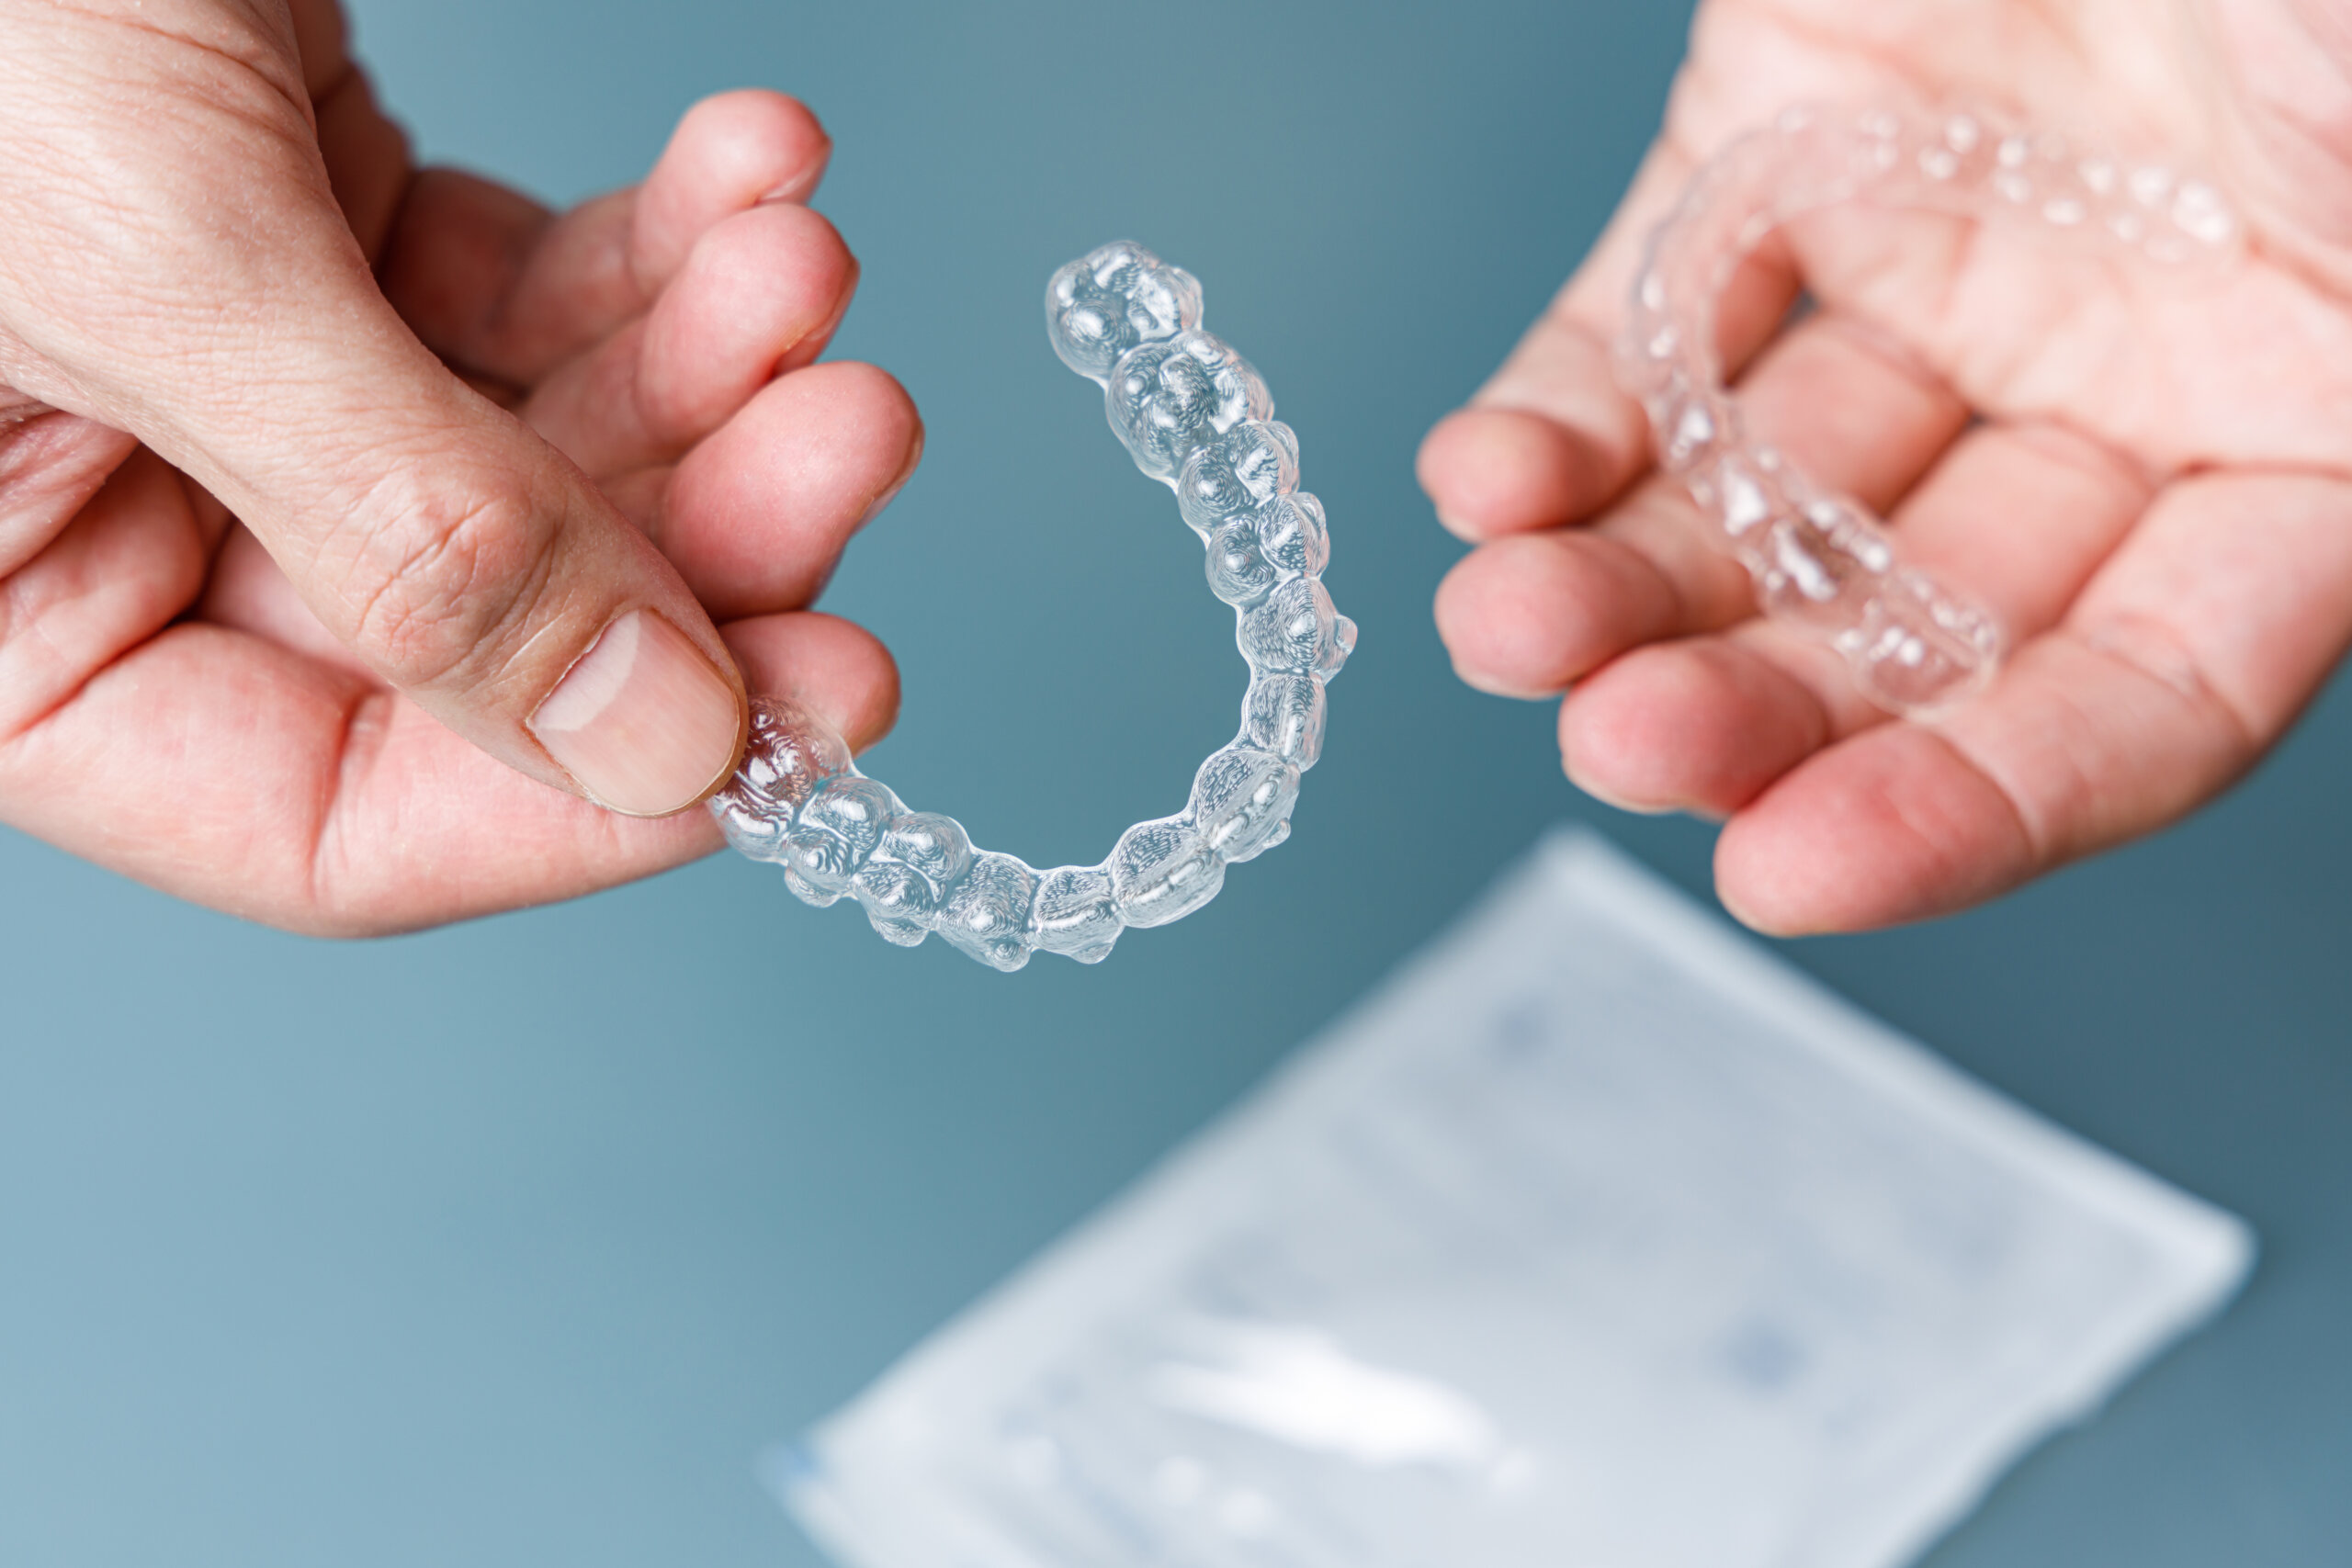 Invisalign is available at Aquila Chandler AZ